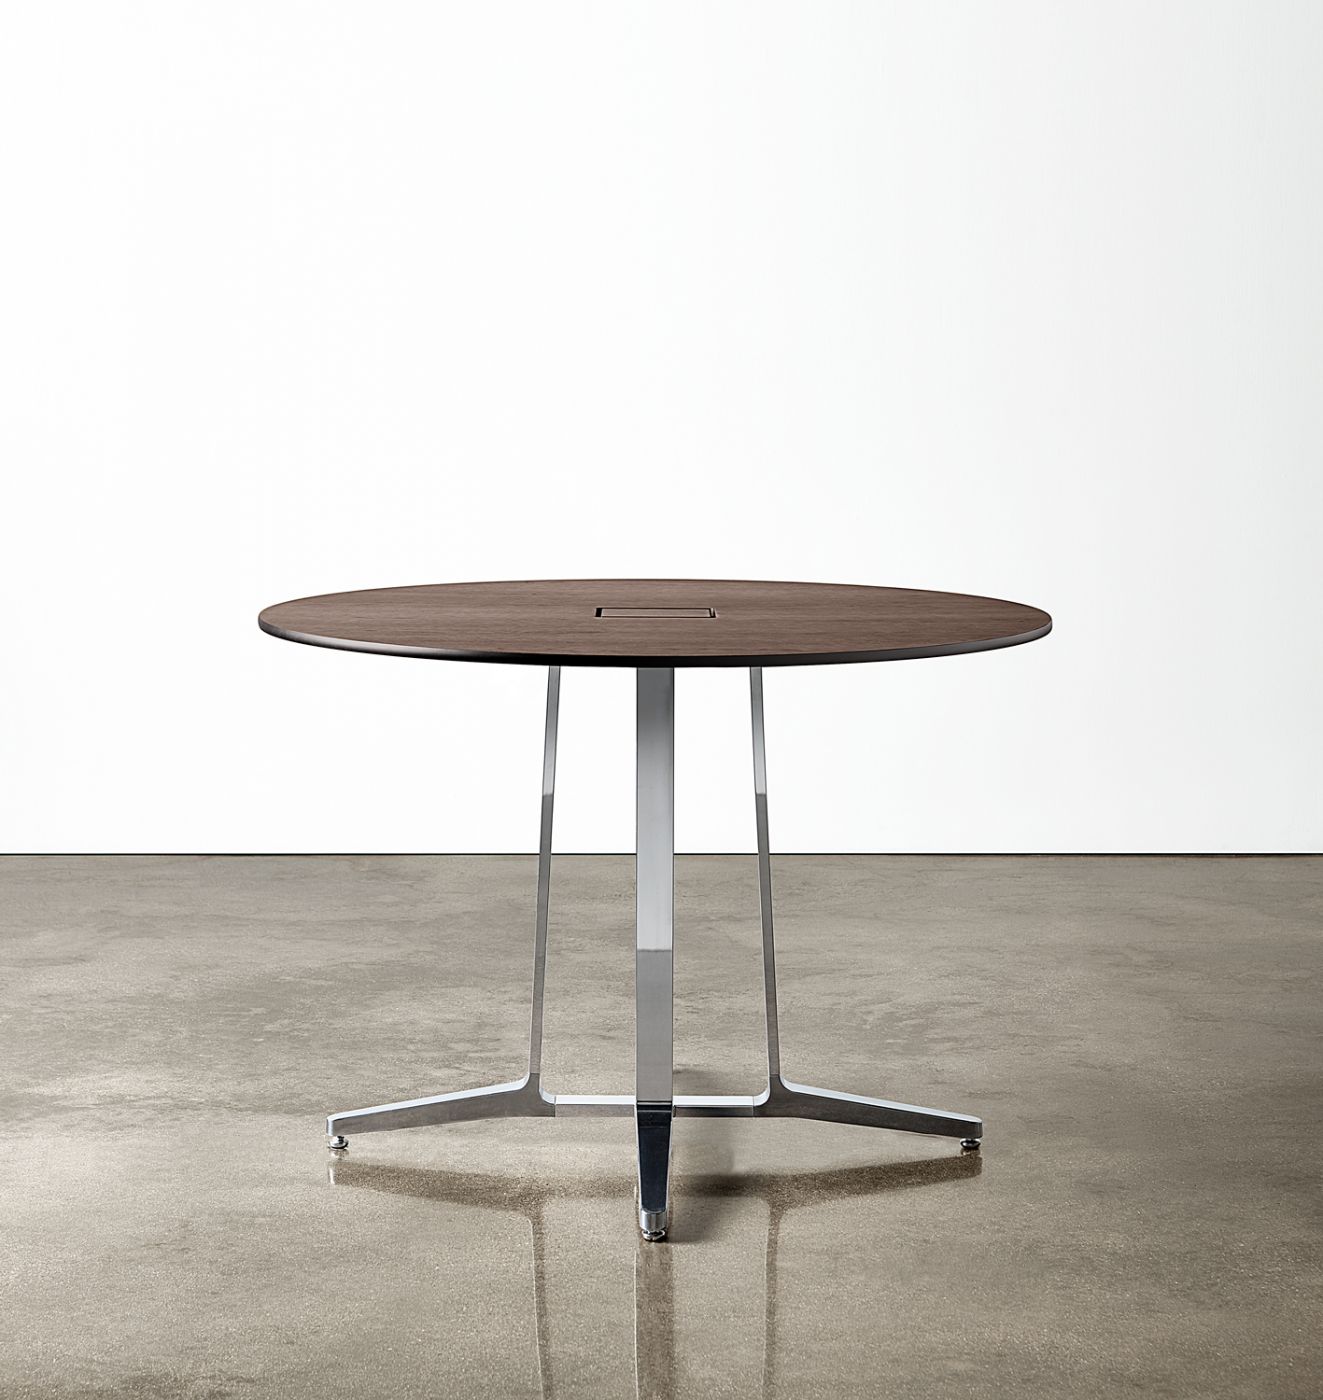 Skill conference tables are offered in a full range of sizes and finishes.